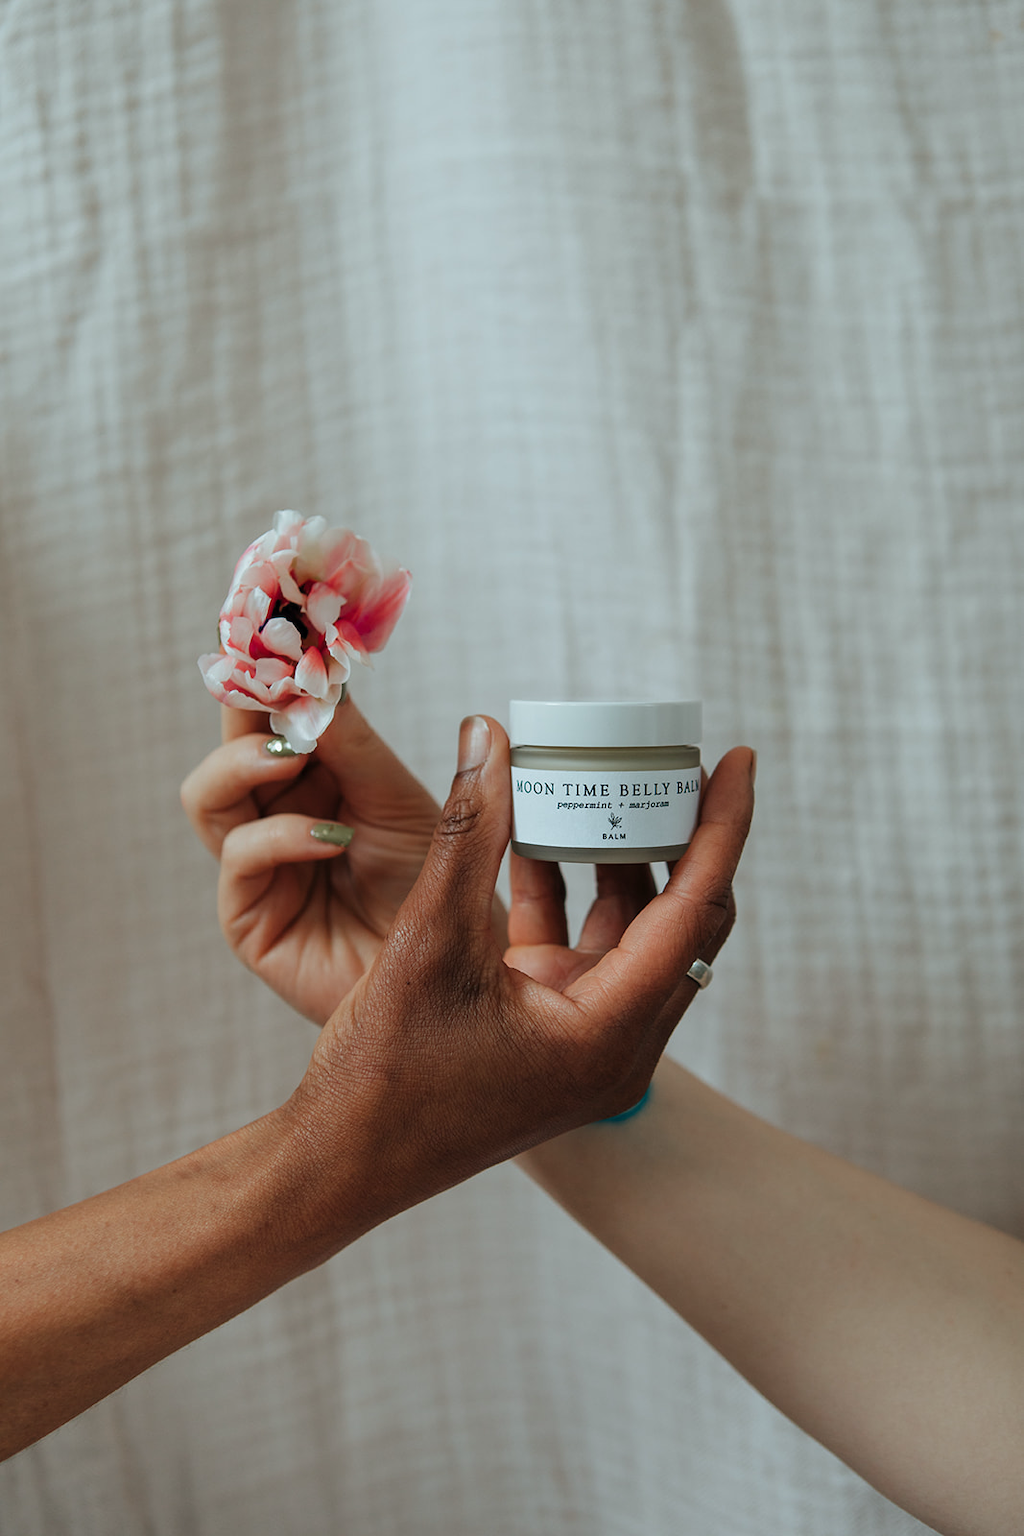 Forage Botanicals Moon Time Belly Balm. Vegan menstrual cramp relief. One hand is holding the jar of balm, while another hand crosses it from behind holding a pink flower